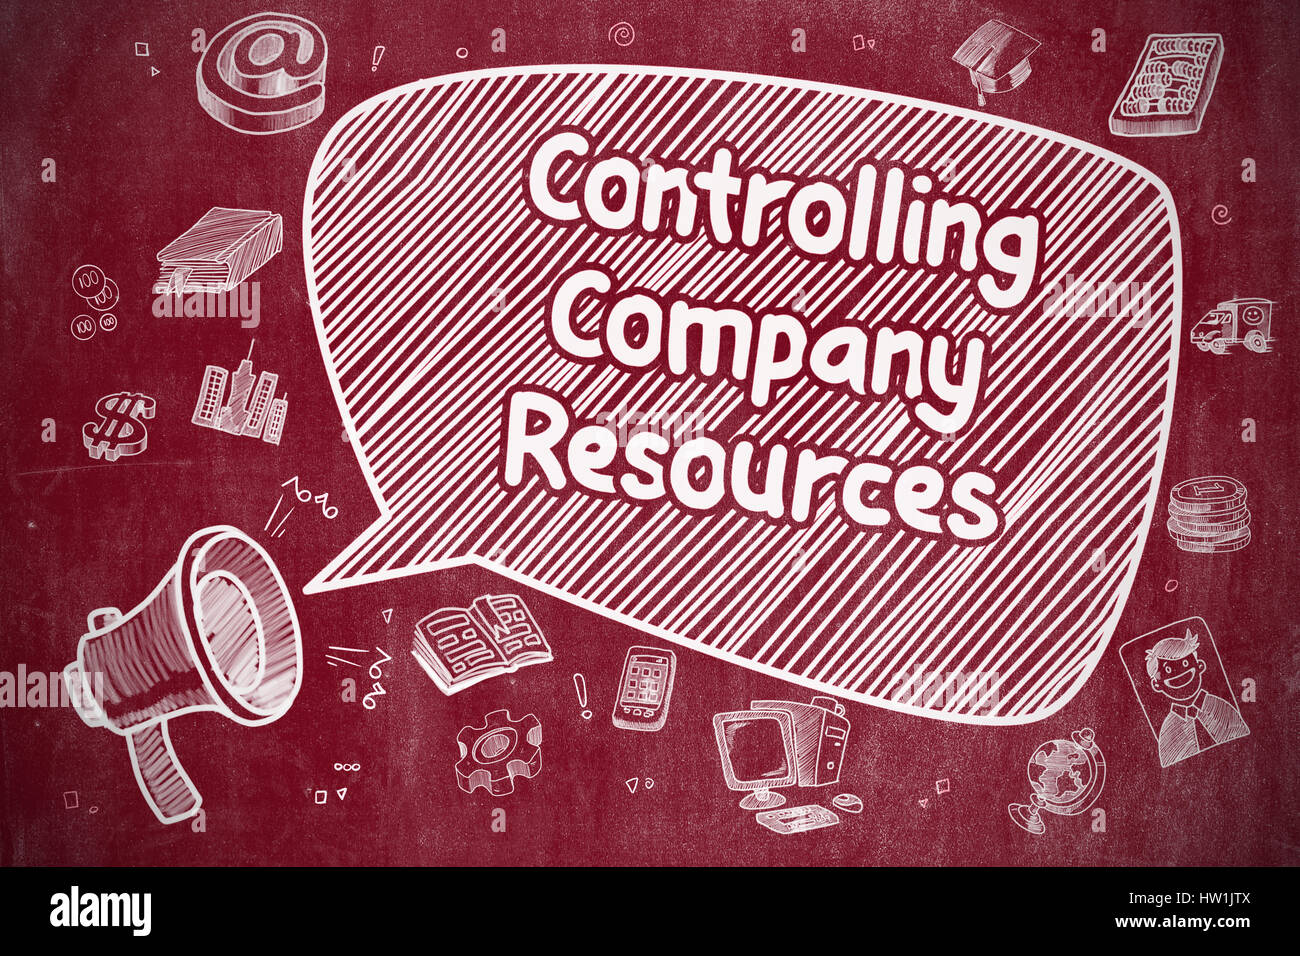 Controlling Company Resources - Business Concept. Stock Photo